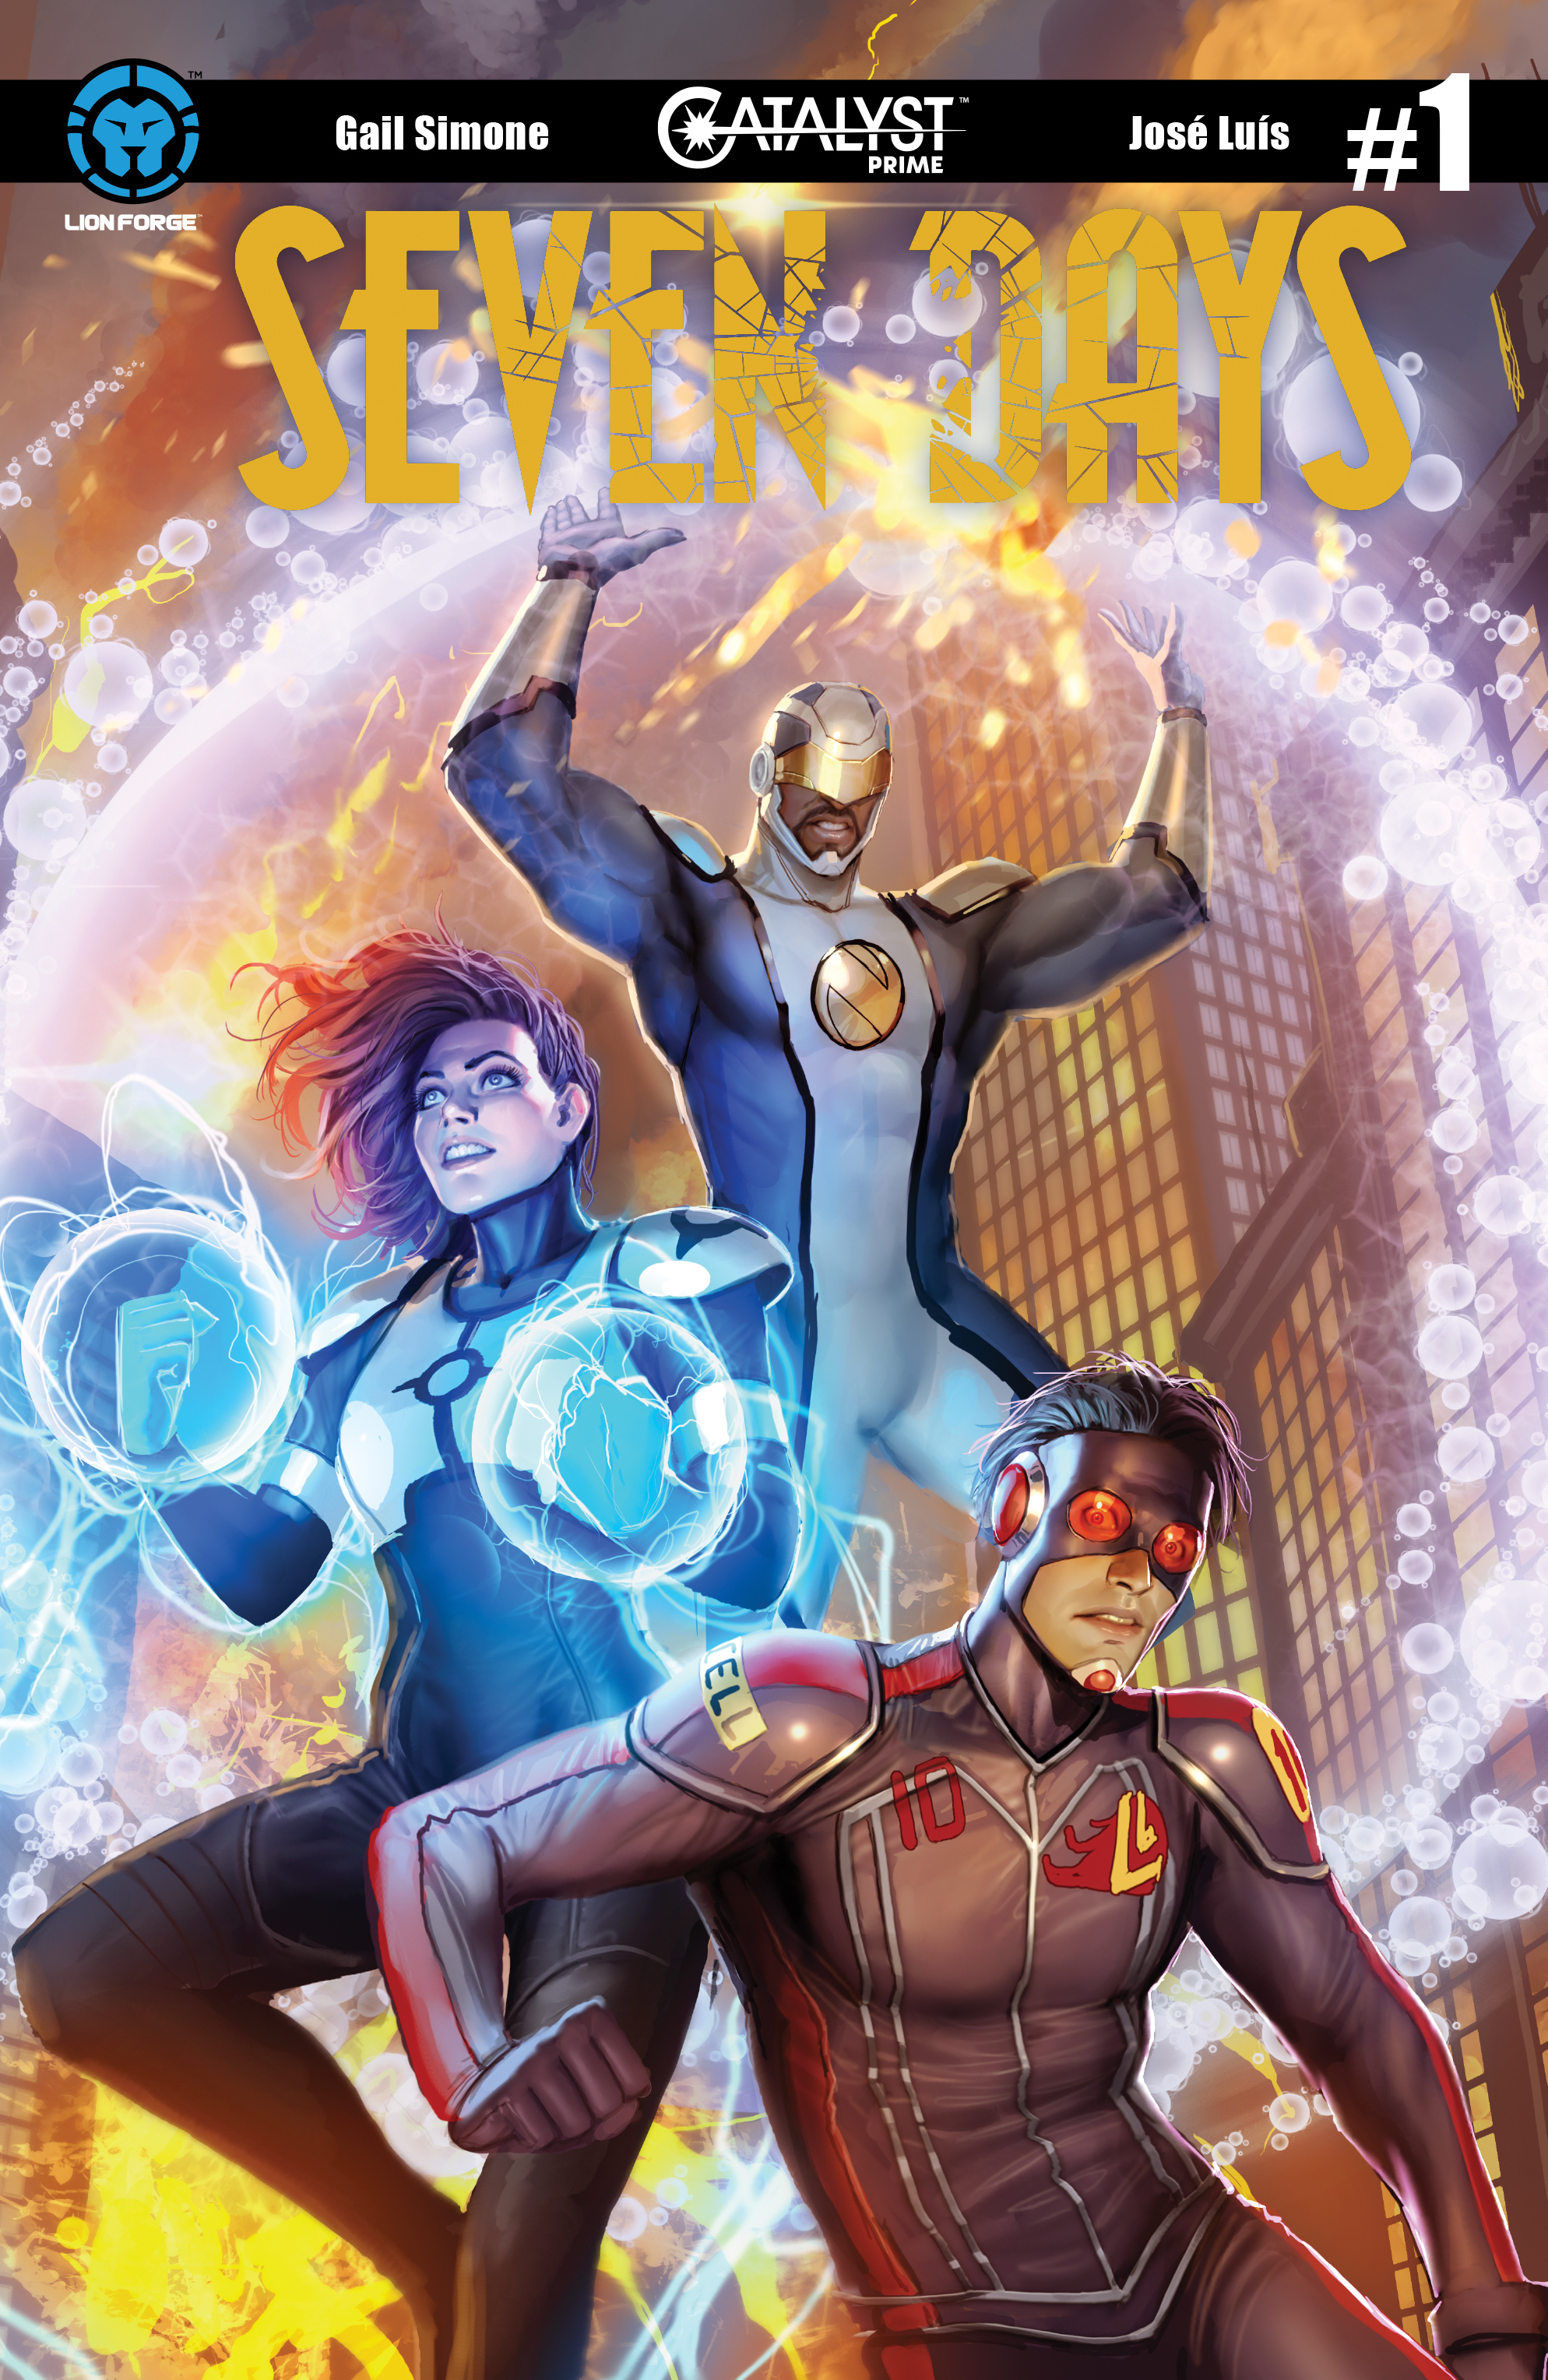 Read online Catalyst Prime: Seven Days comic -  Issue #1 - 1